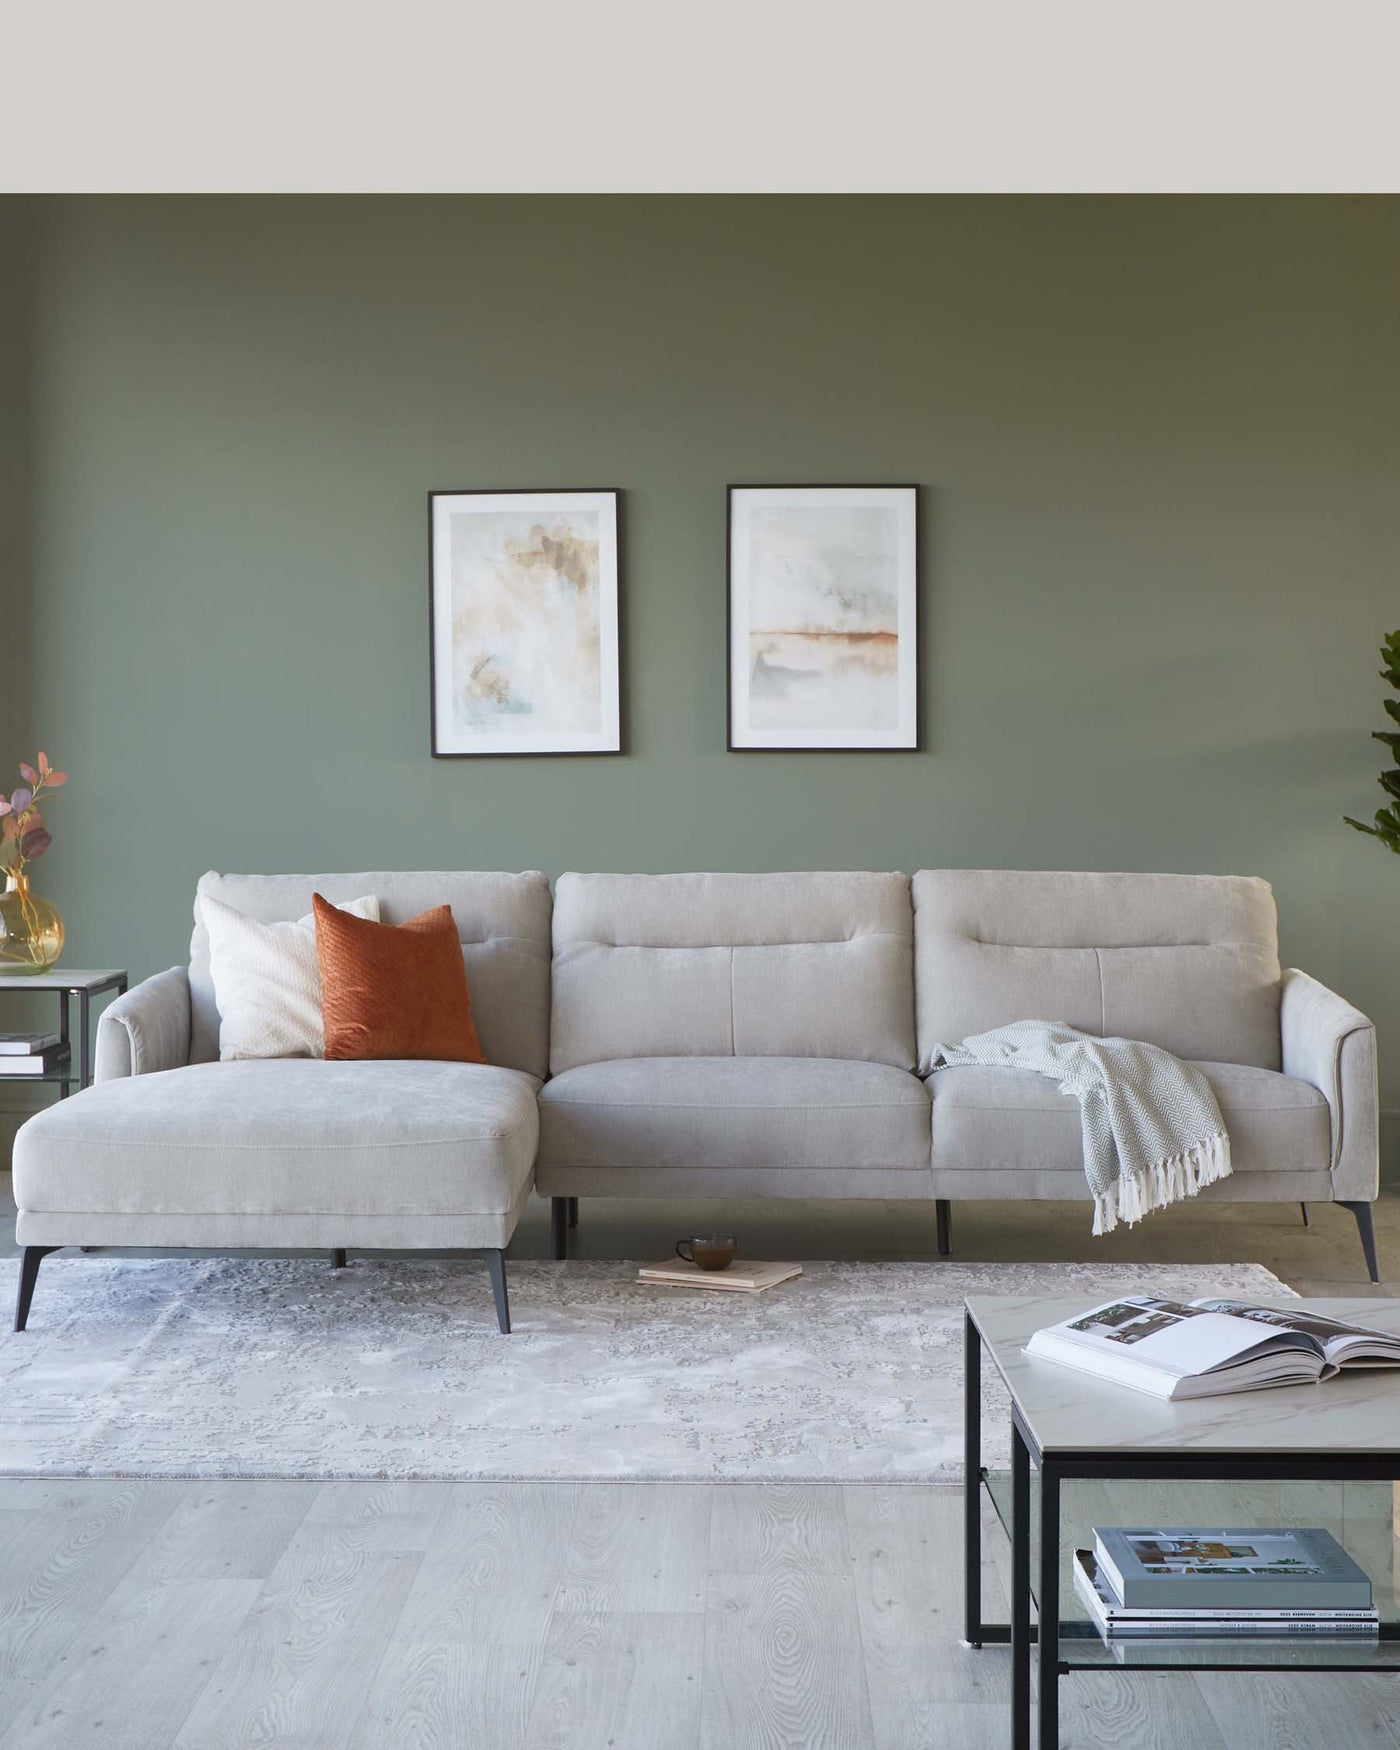 Modern light grey fabric sectional sofa with clean lines and metal legs, accompanied by a matching chaise lounge, positioned on a textured off-white area rug. A sleek black metal coffee table with a glass top and magazines on the lower shelf is placed in front. The ensemble is framed with minimalist wall art above the sofa and a small indoor plant to the left, creating an elegant living space.